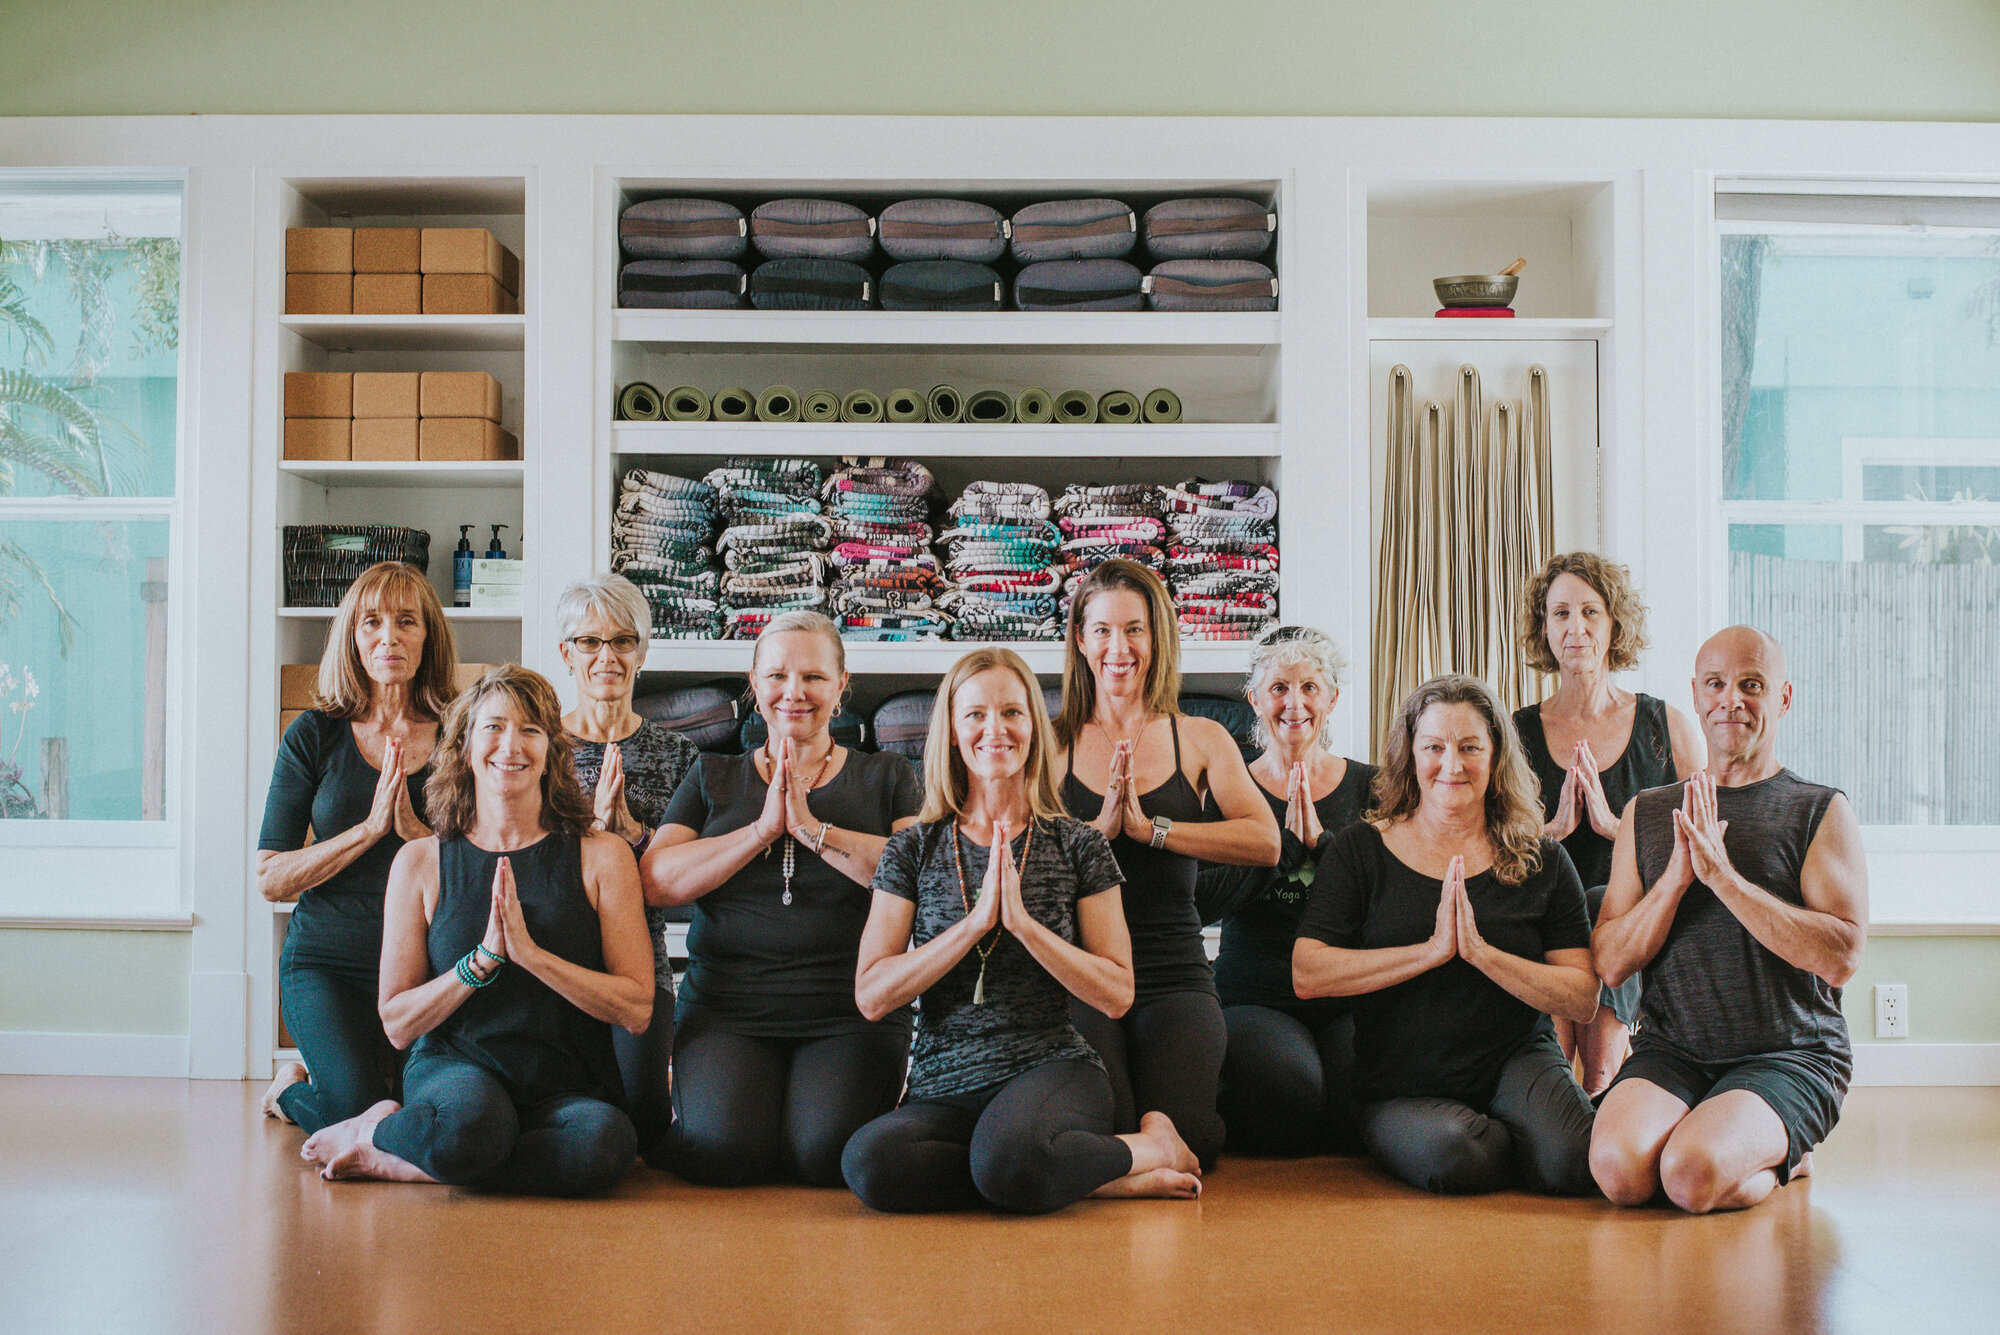 The Yoga Sanctuary Staff continues to grow